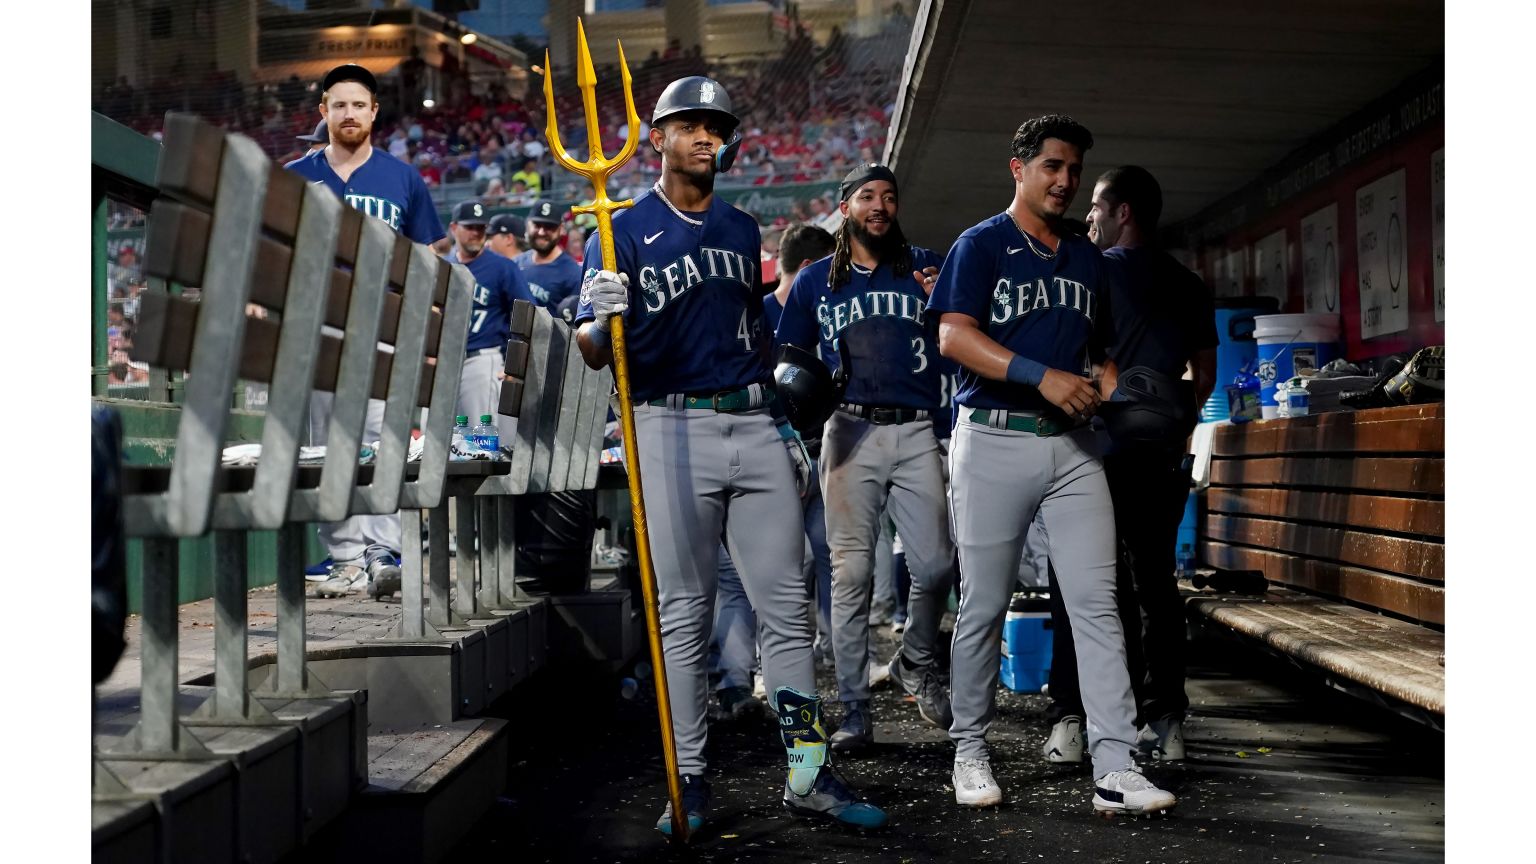 Top 40 greatest players in Seattle Mariners history: The top 10